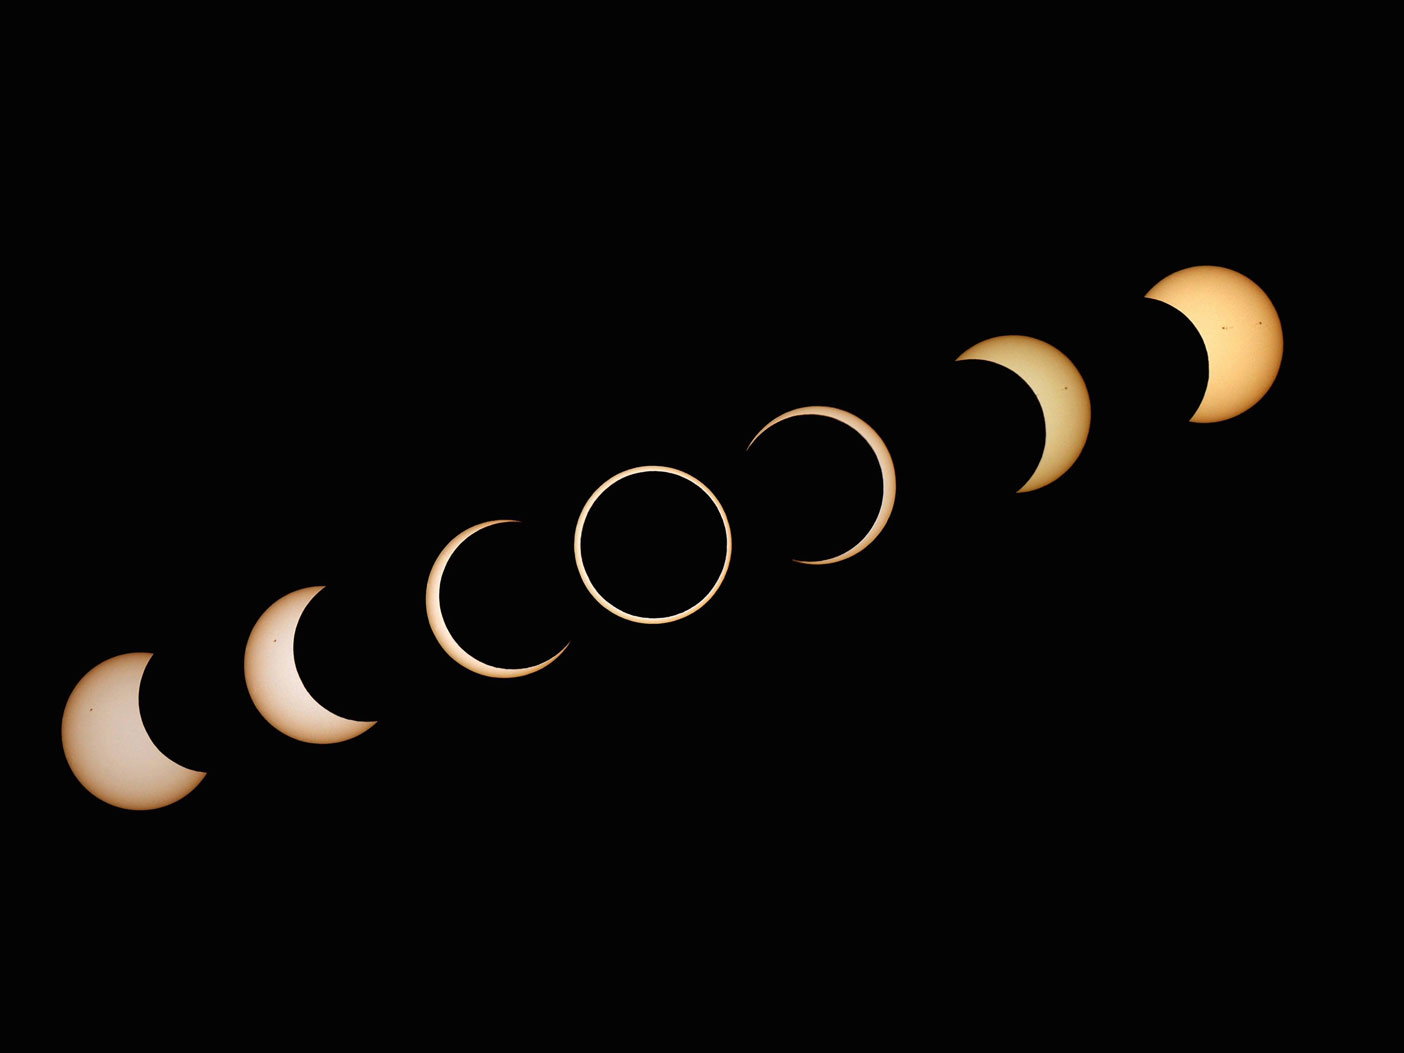 A mosaic of the different phases of the 2012 annular eclipse.